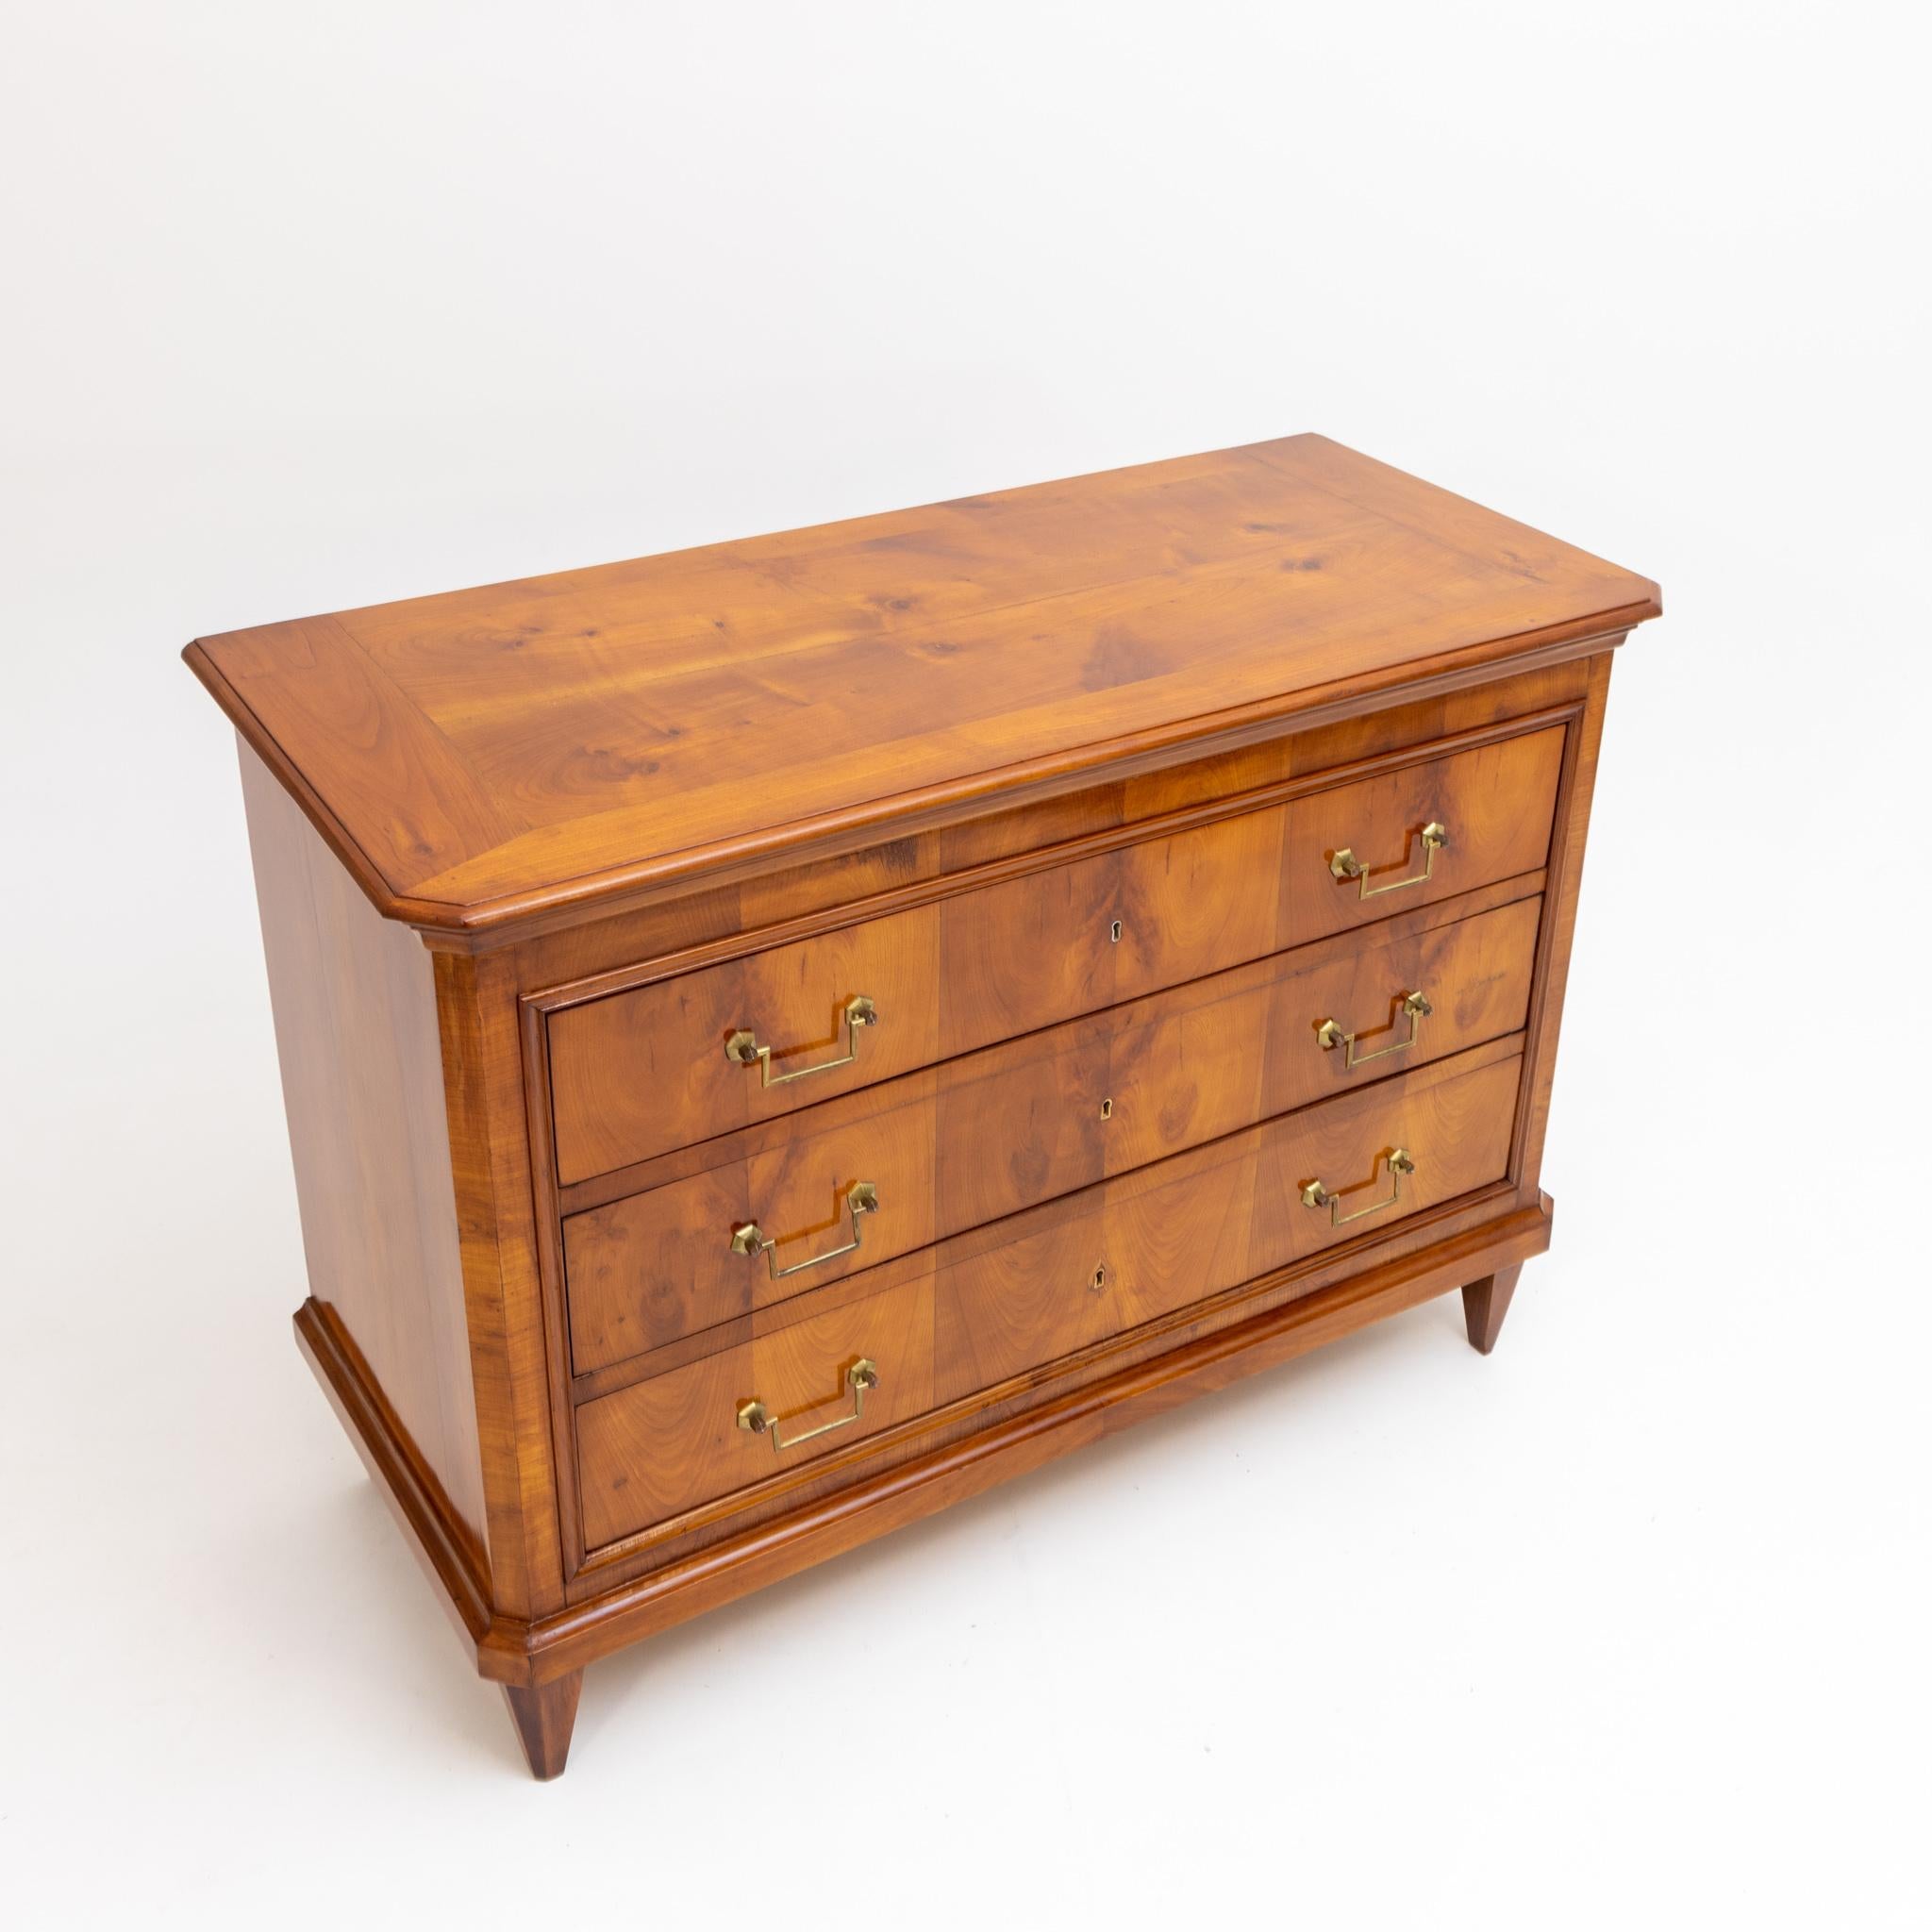 Chest of drawers in cherry veneer, with three drawers on pointed feet with profiled edges.